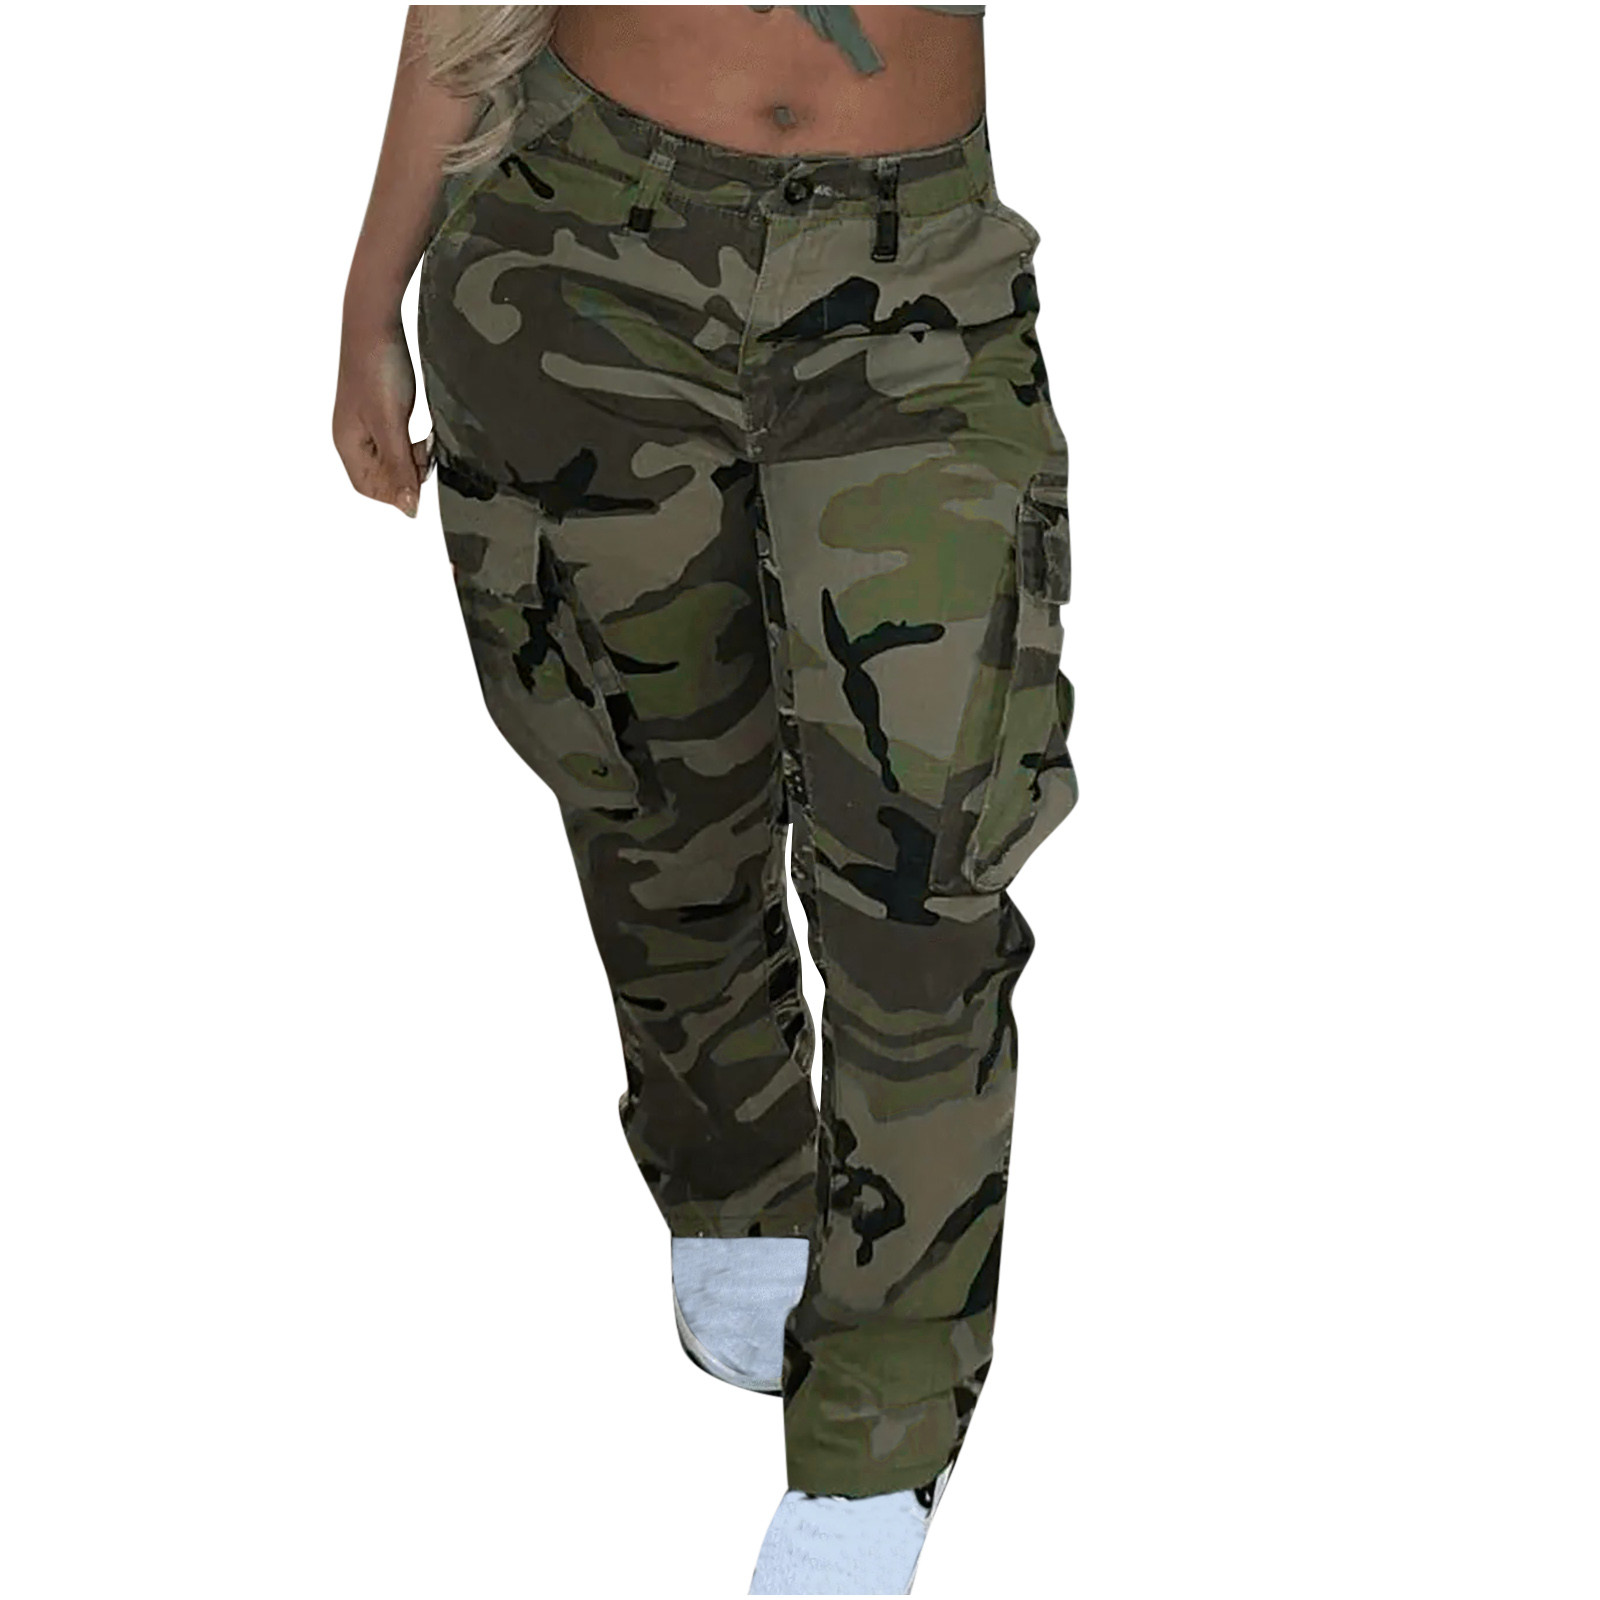 Women’s camo cargo pants: A Blend of Utility and Fashion缩略图